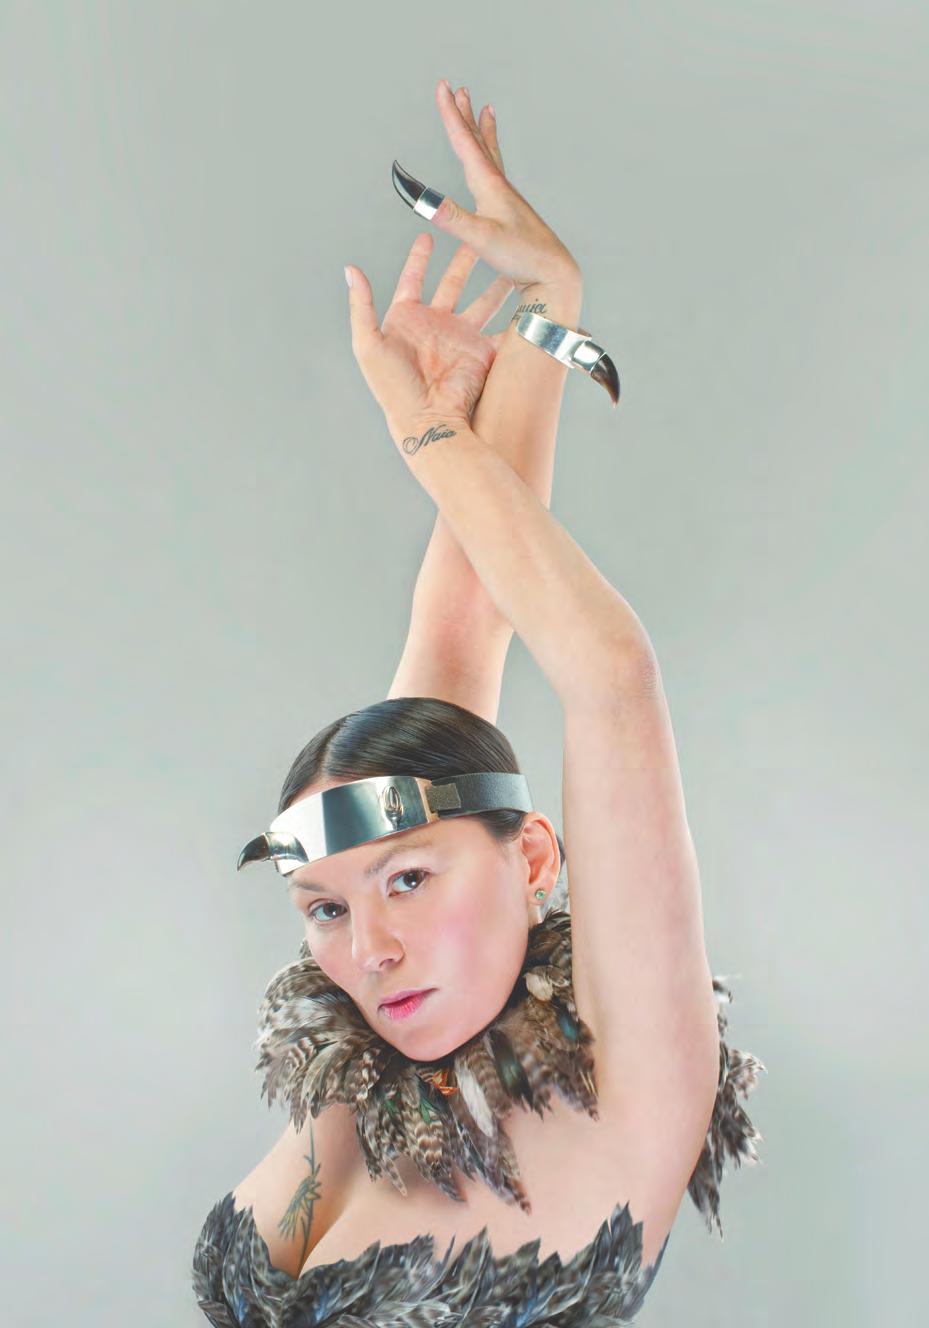 8 TANYA TAGAQ TANYA TAGAQ Tanya Tagaq in concert with Nanook of the North WEST COAST PREMIERE PSU Lincoln Hall Fri, Sept 12 Sat, Sept 13 8:30 pm CREDITS Film Director and Producer: Robert J.